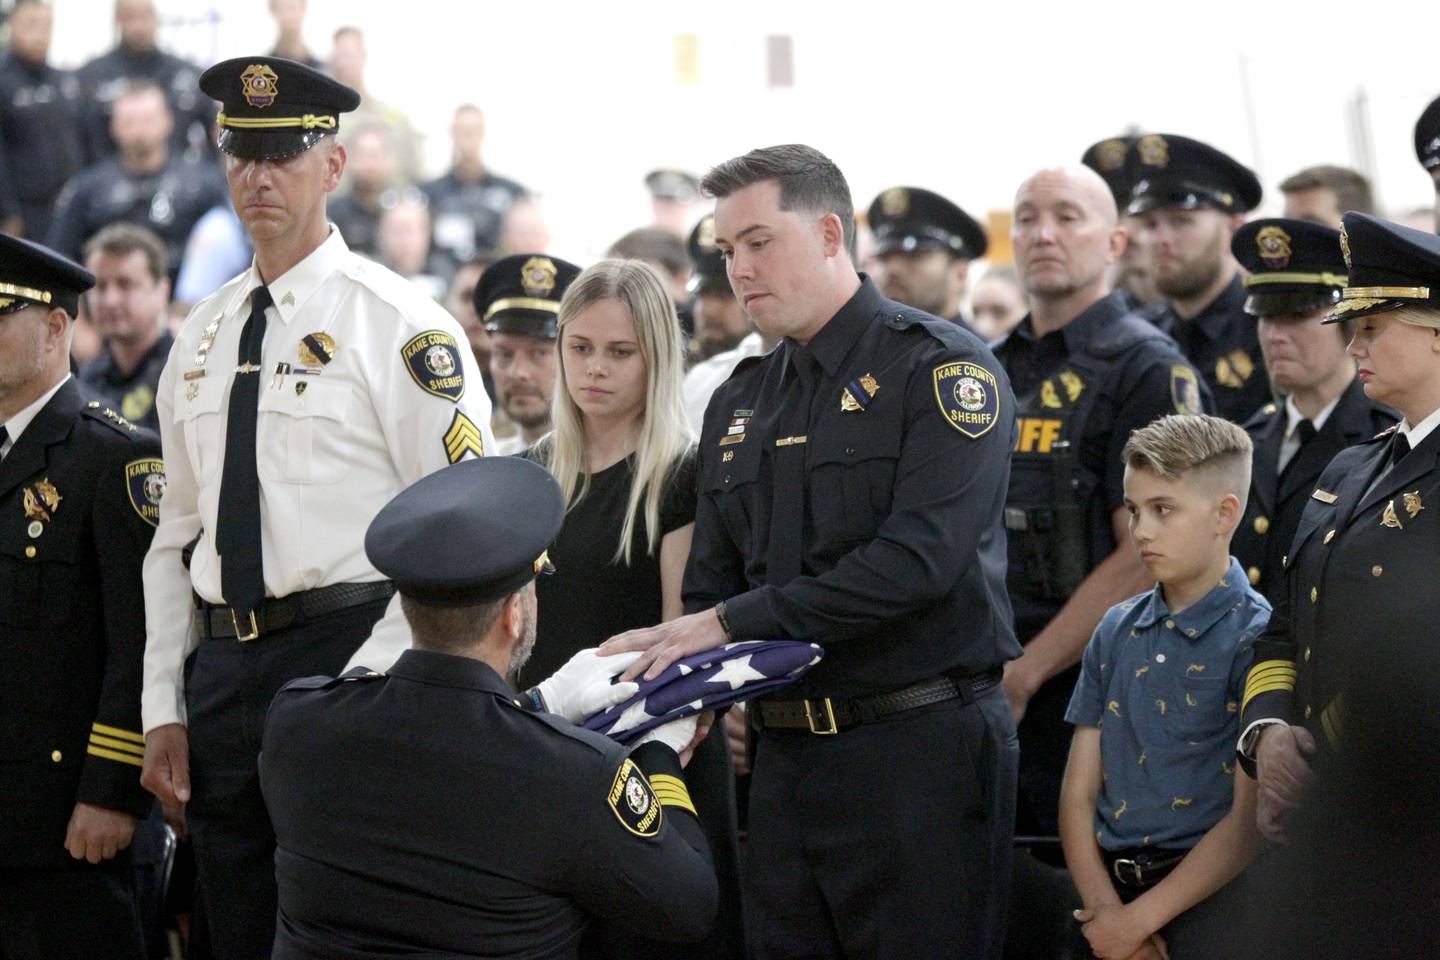 Kane County Sheriff Ron Hain (kneeling) presents an American flag to Kane County Deputy Luke Weston and his wife, Rachel, during a funeral in honor of Kane County Sheriff K9 Hudson, who lost his life in the line of duty last month, on Thursday, June 1, 2023 at Kaneland Harter Middle School in Sugar Grove. Deputy Weston was Hudson’s handler.